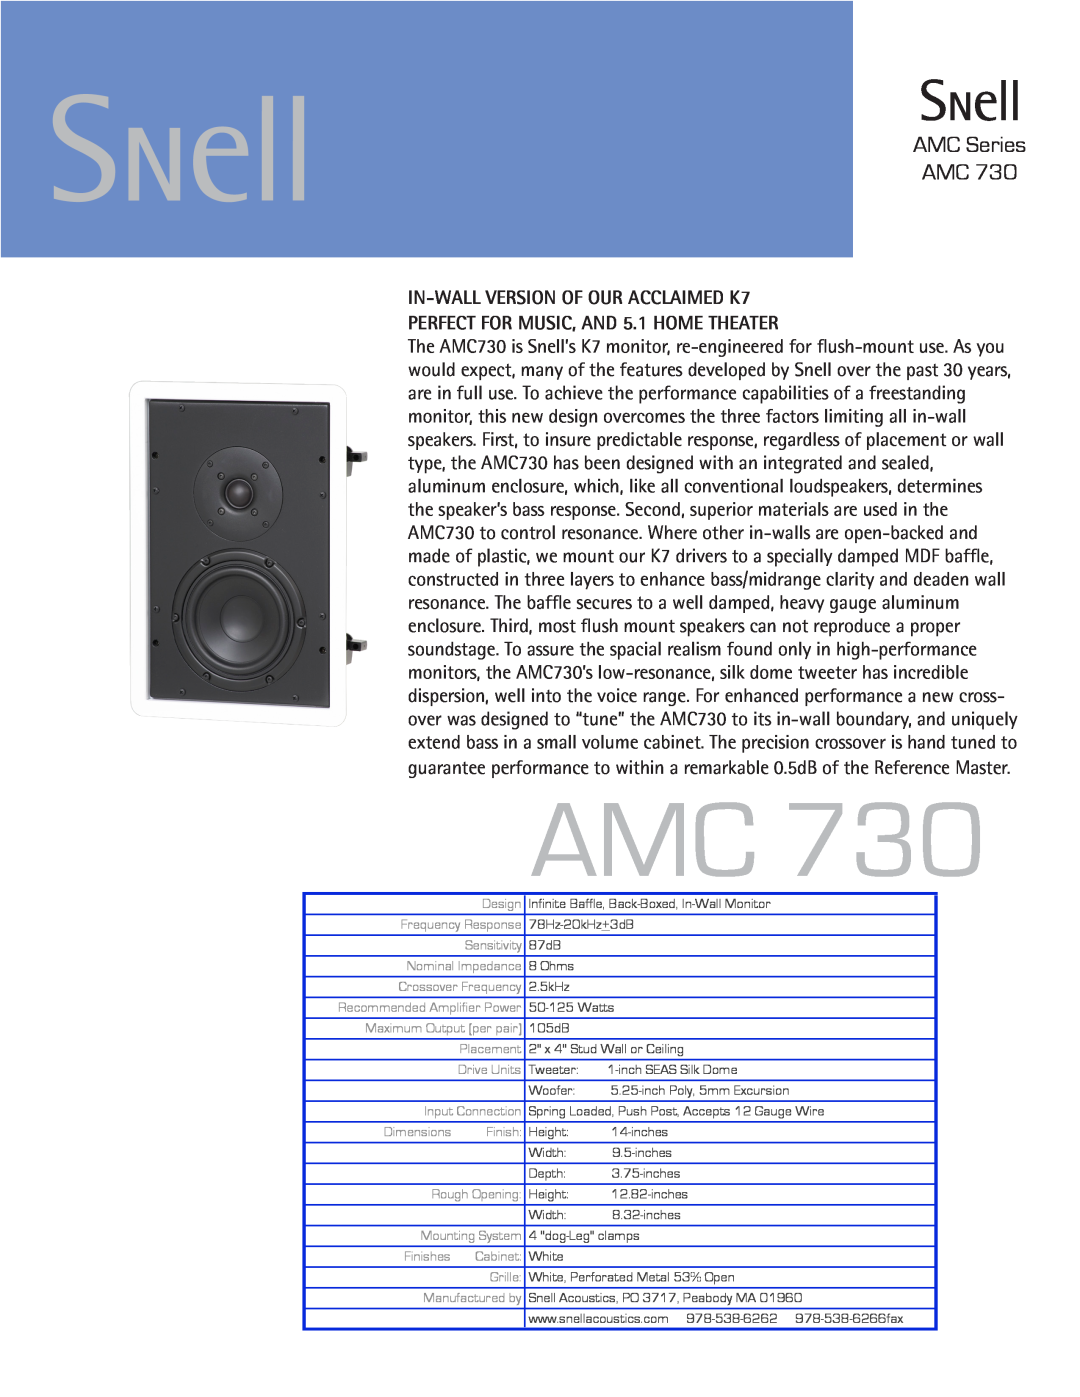 Snell Acoustics AMC 730 dimensions AMC Series AMC, IN-WALLVERSION OF OUR ACCLAIMED K7 